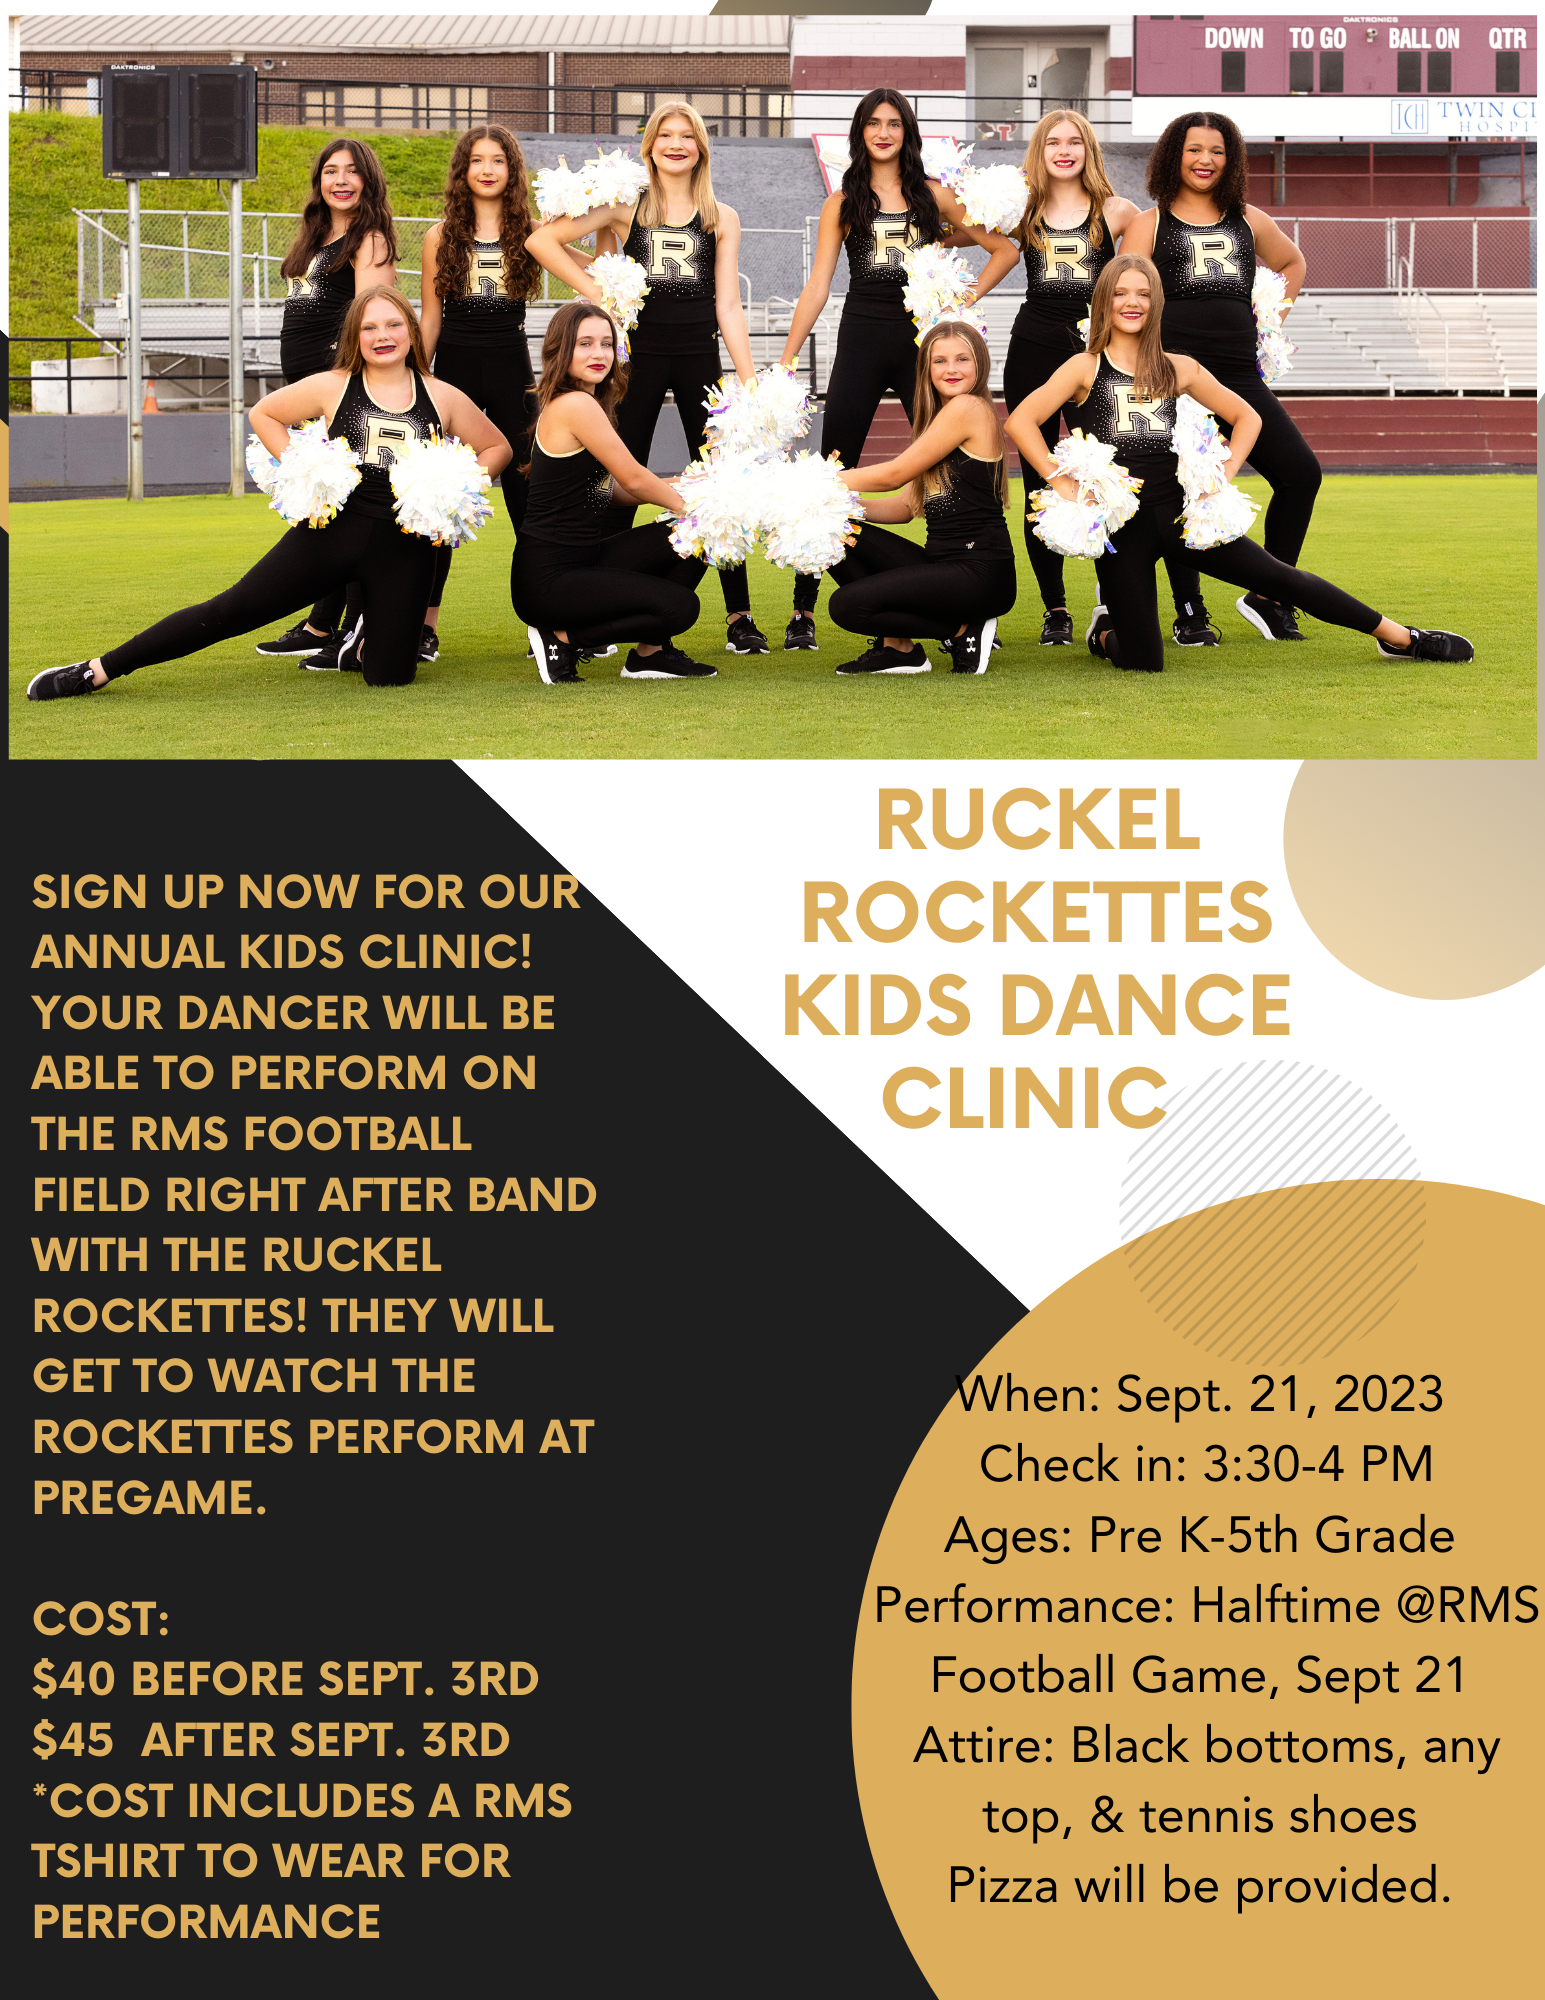 Details for RMS Dance Team Kids Clinic